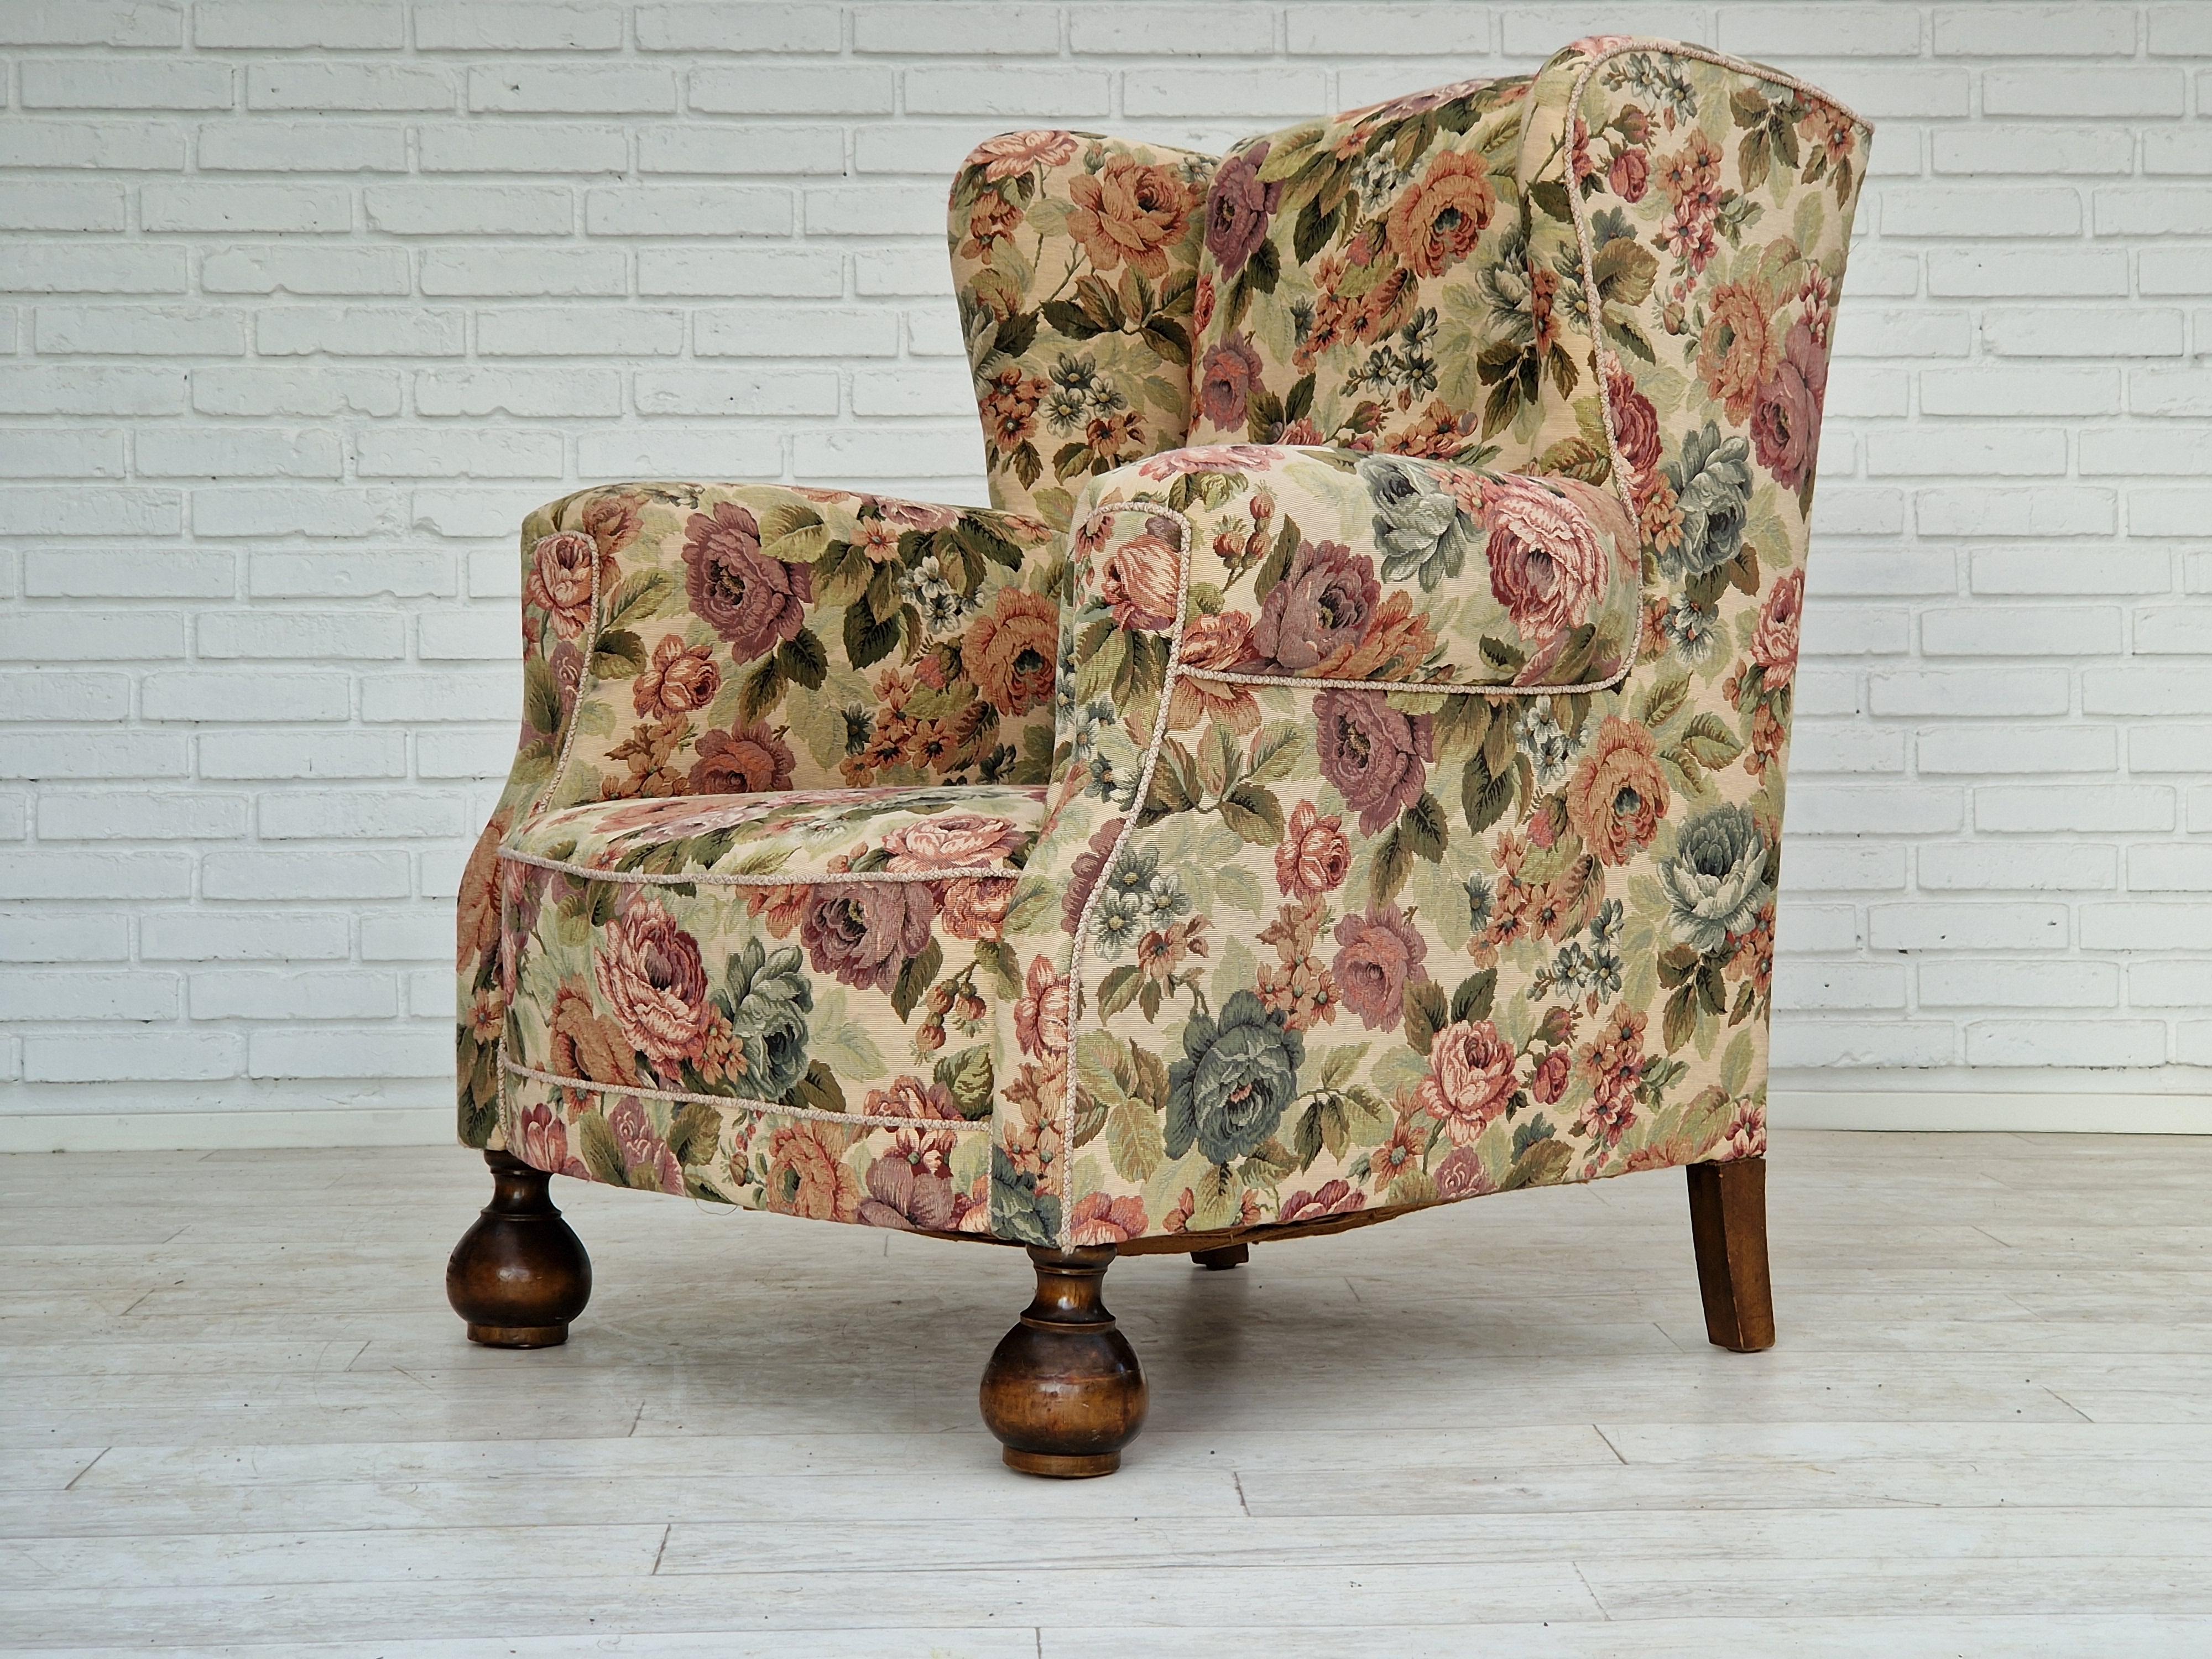 1950s, Danish vintage relax chair in 